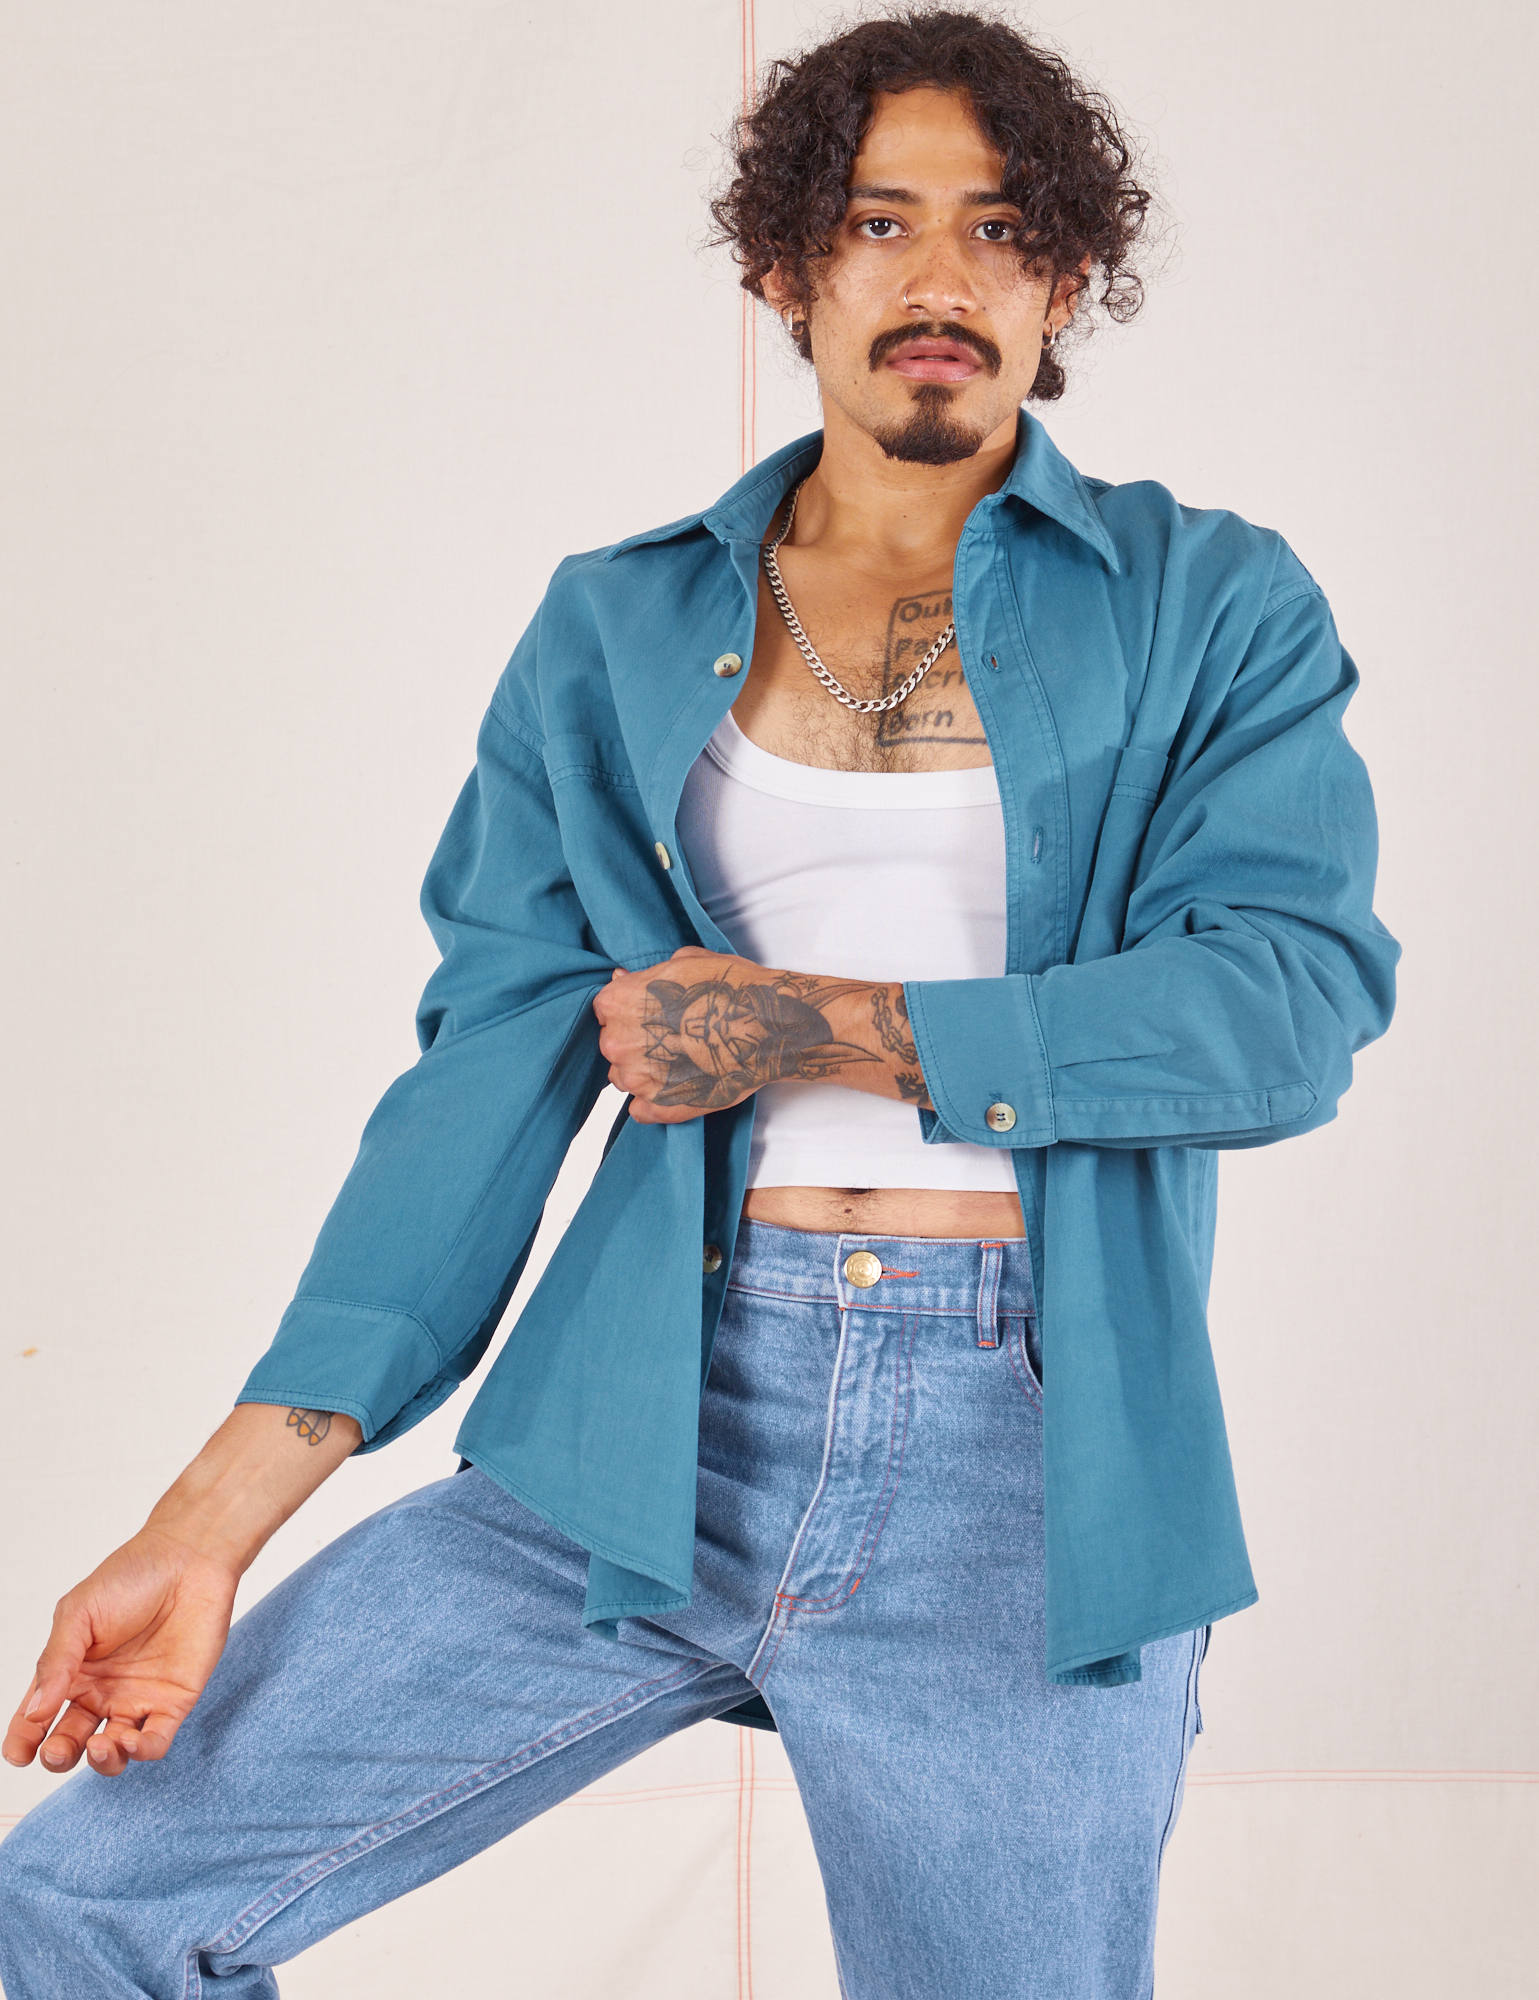 Jesse is wearing Oversize Overshirt in Marine Blue with a vintage off-white Cropped Tank Top underneath